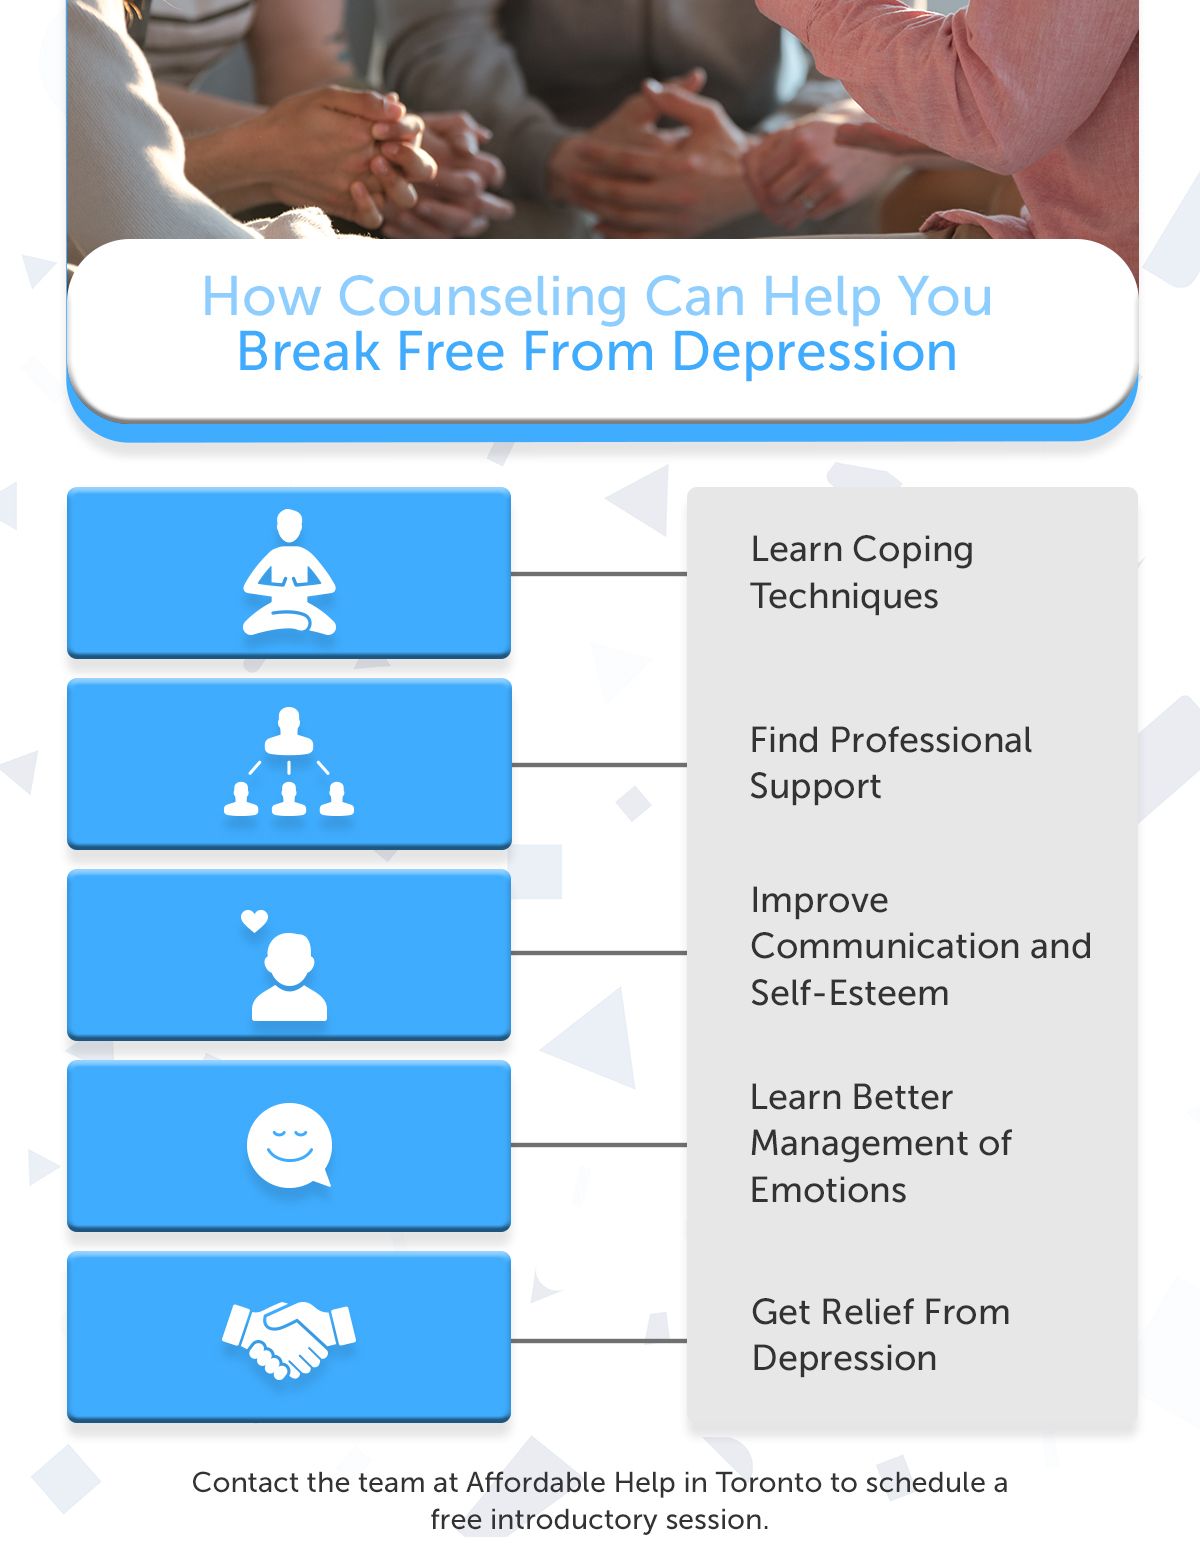 How Counseling Can Help You Break Free From Depression.jpg